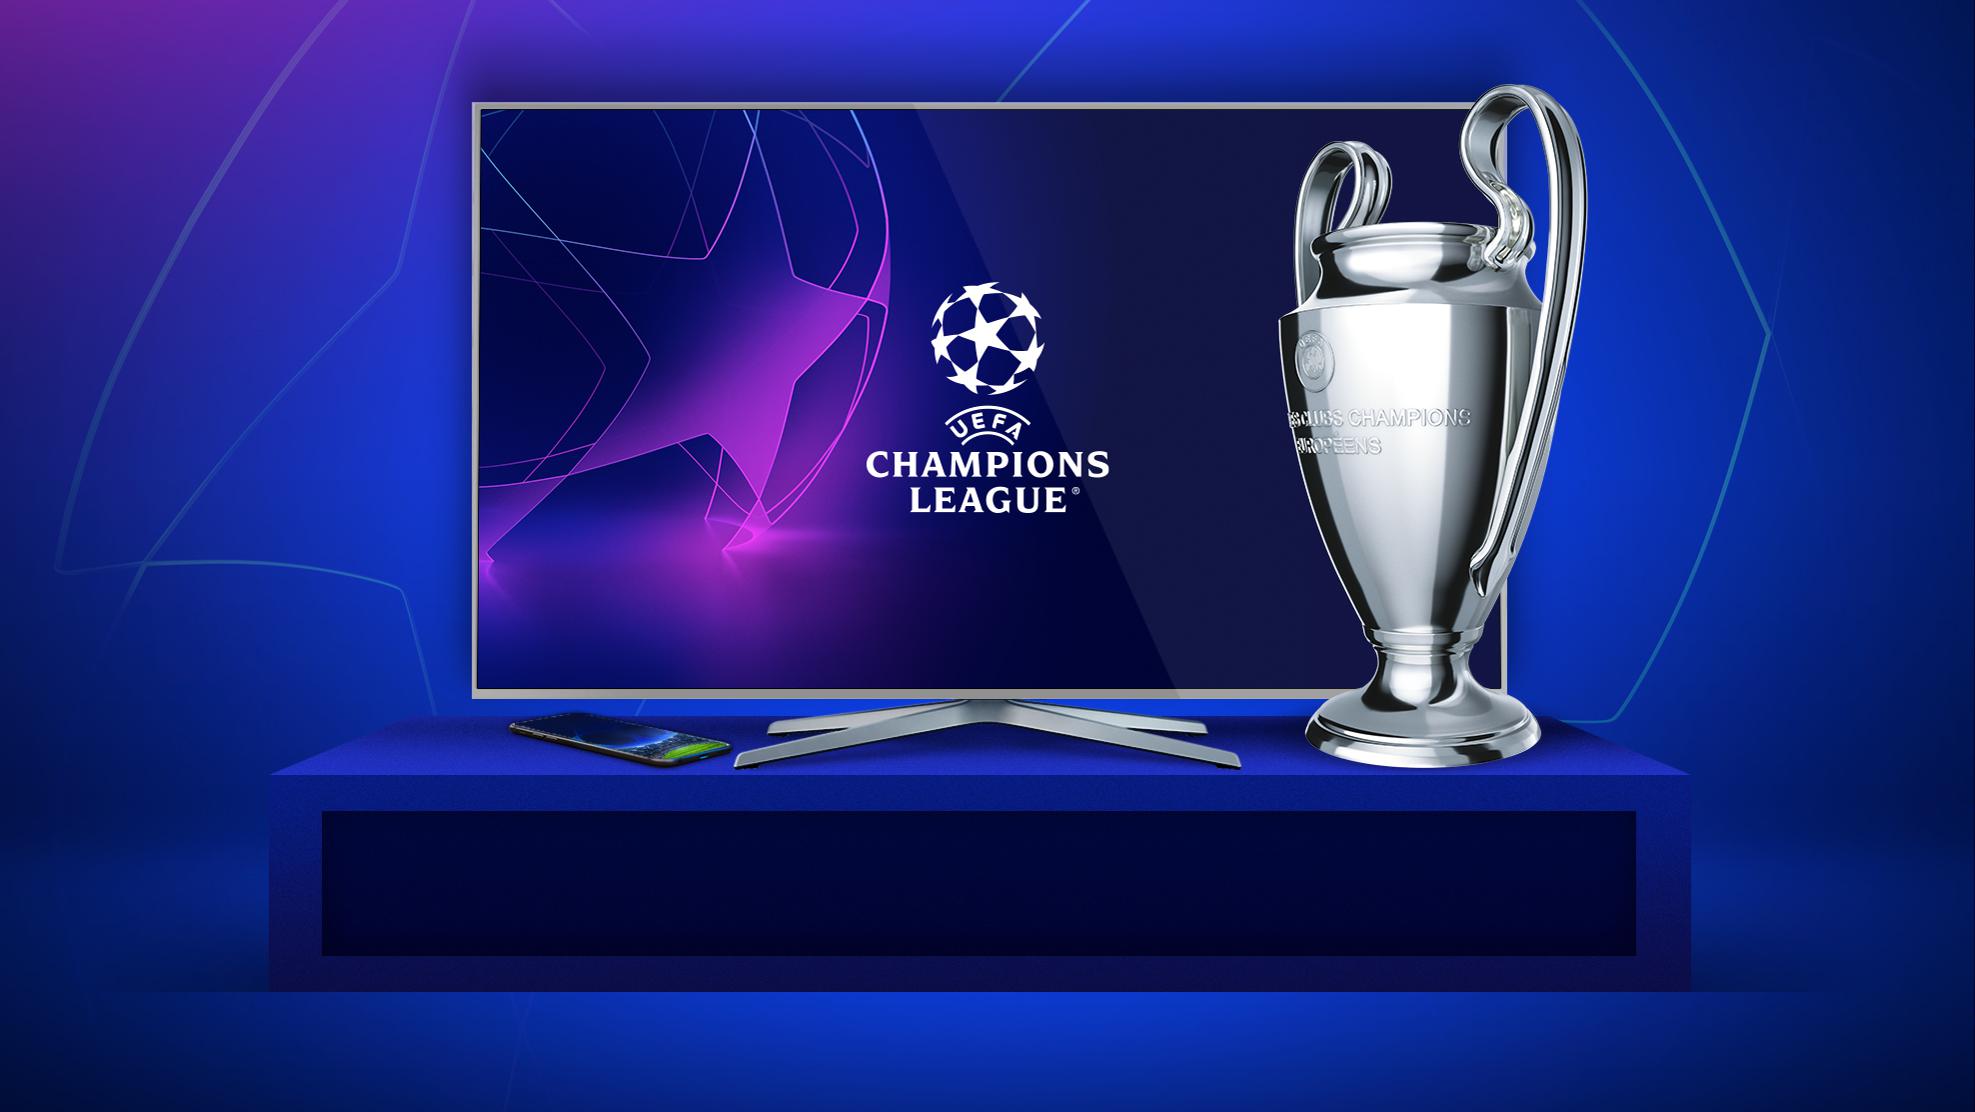 Where to watch the UEFA Champions League: TV broadcast partners, live streams